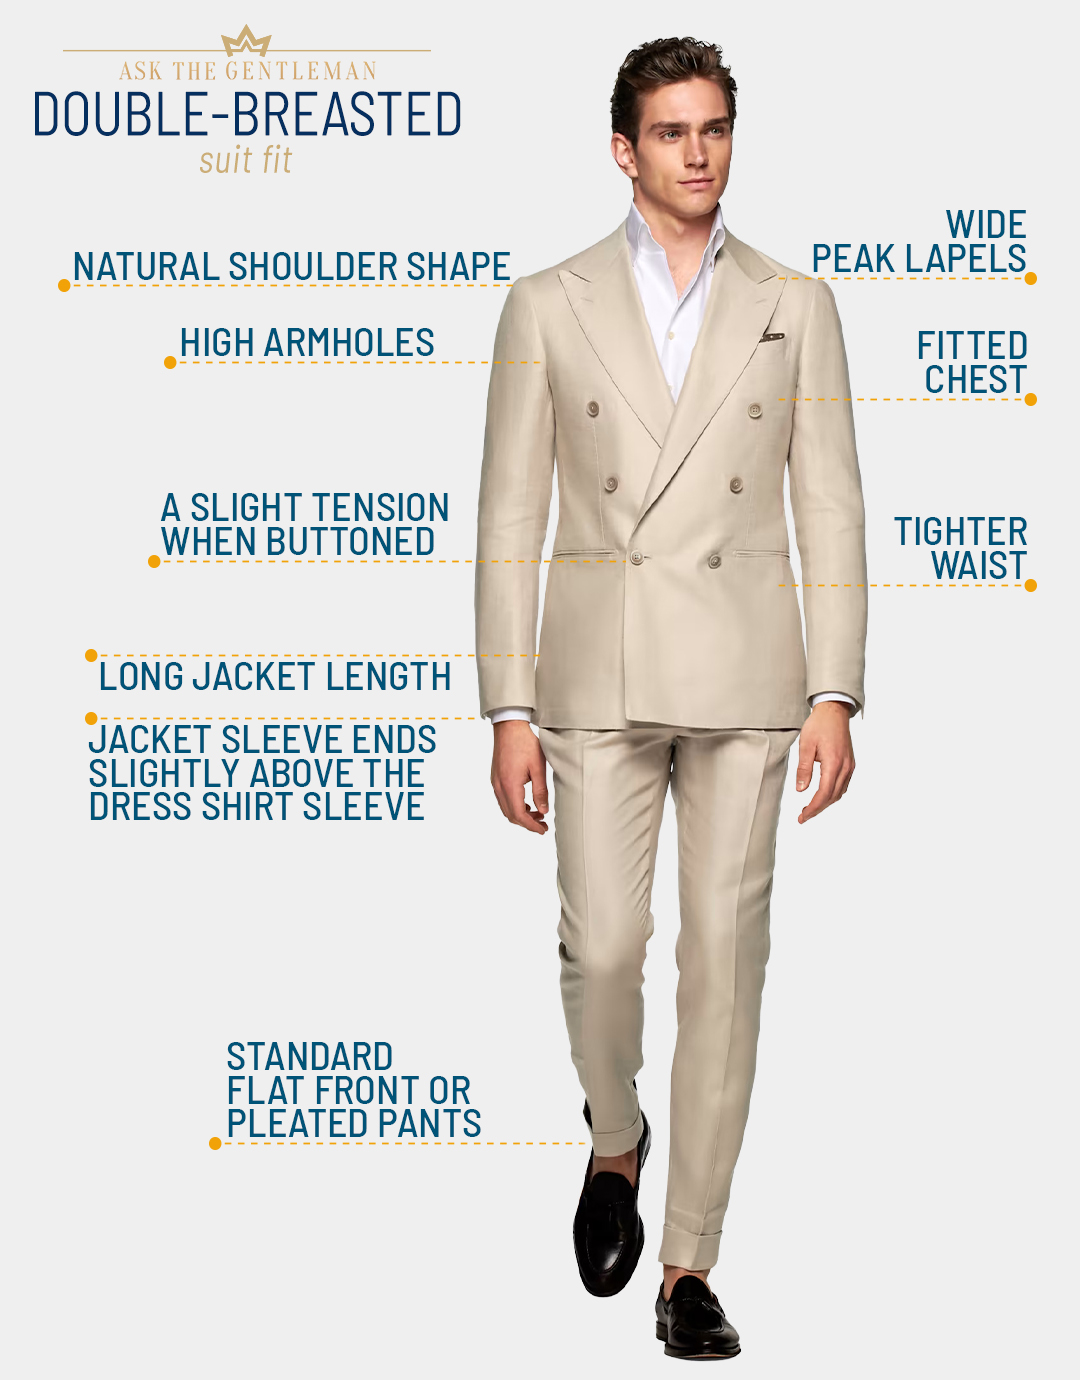 How should a double-breasted suit fit